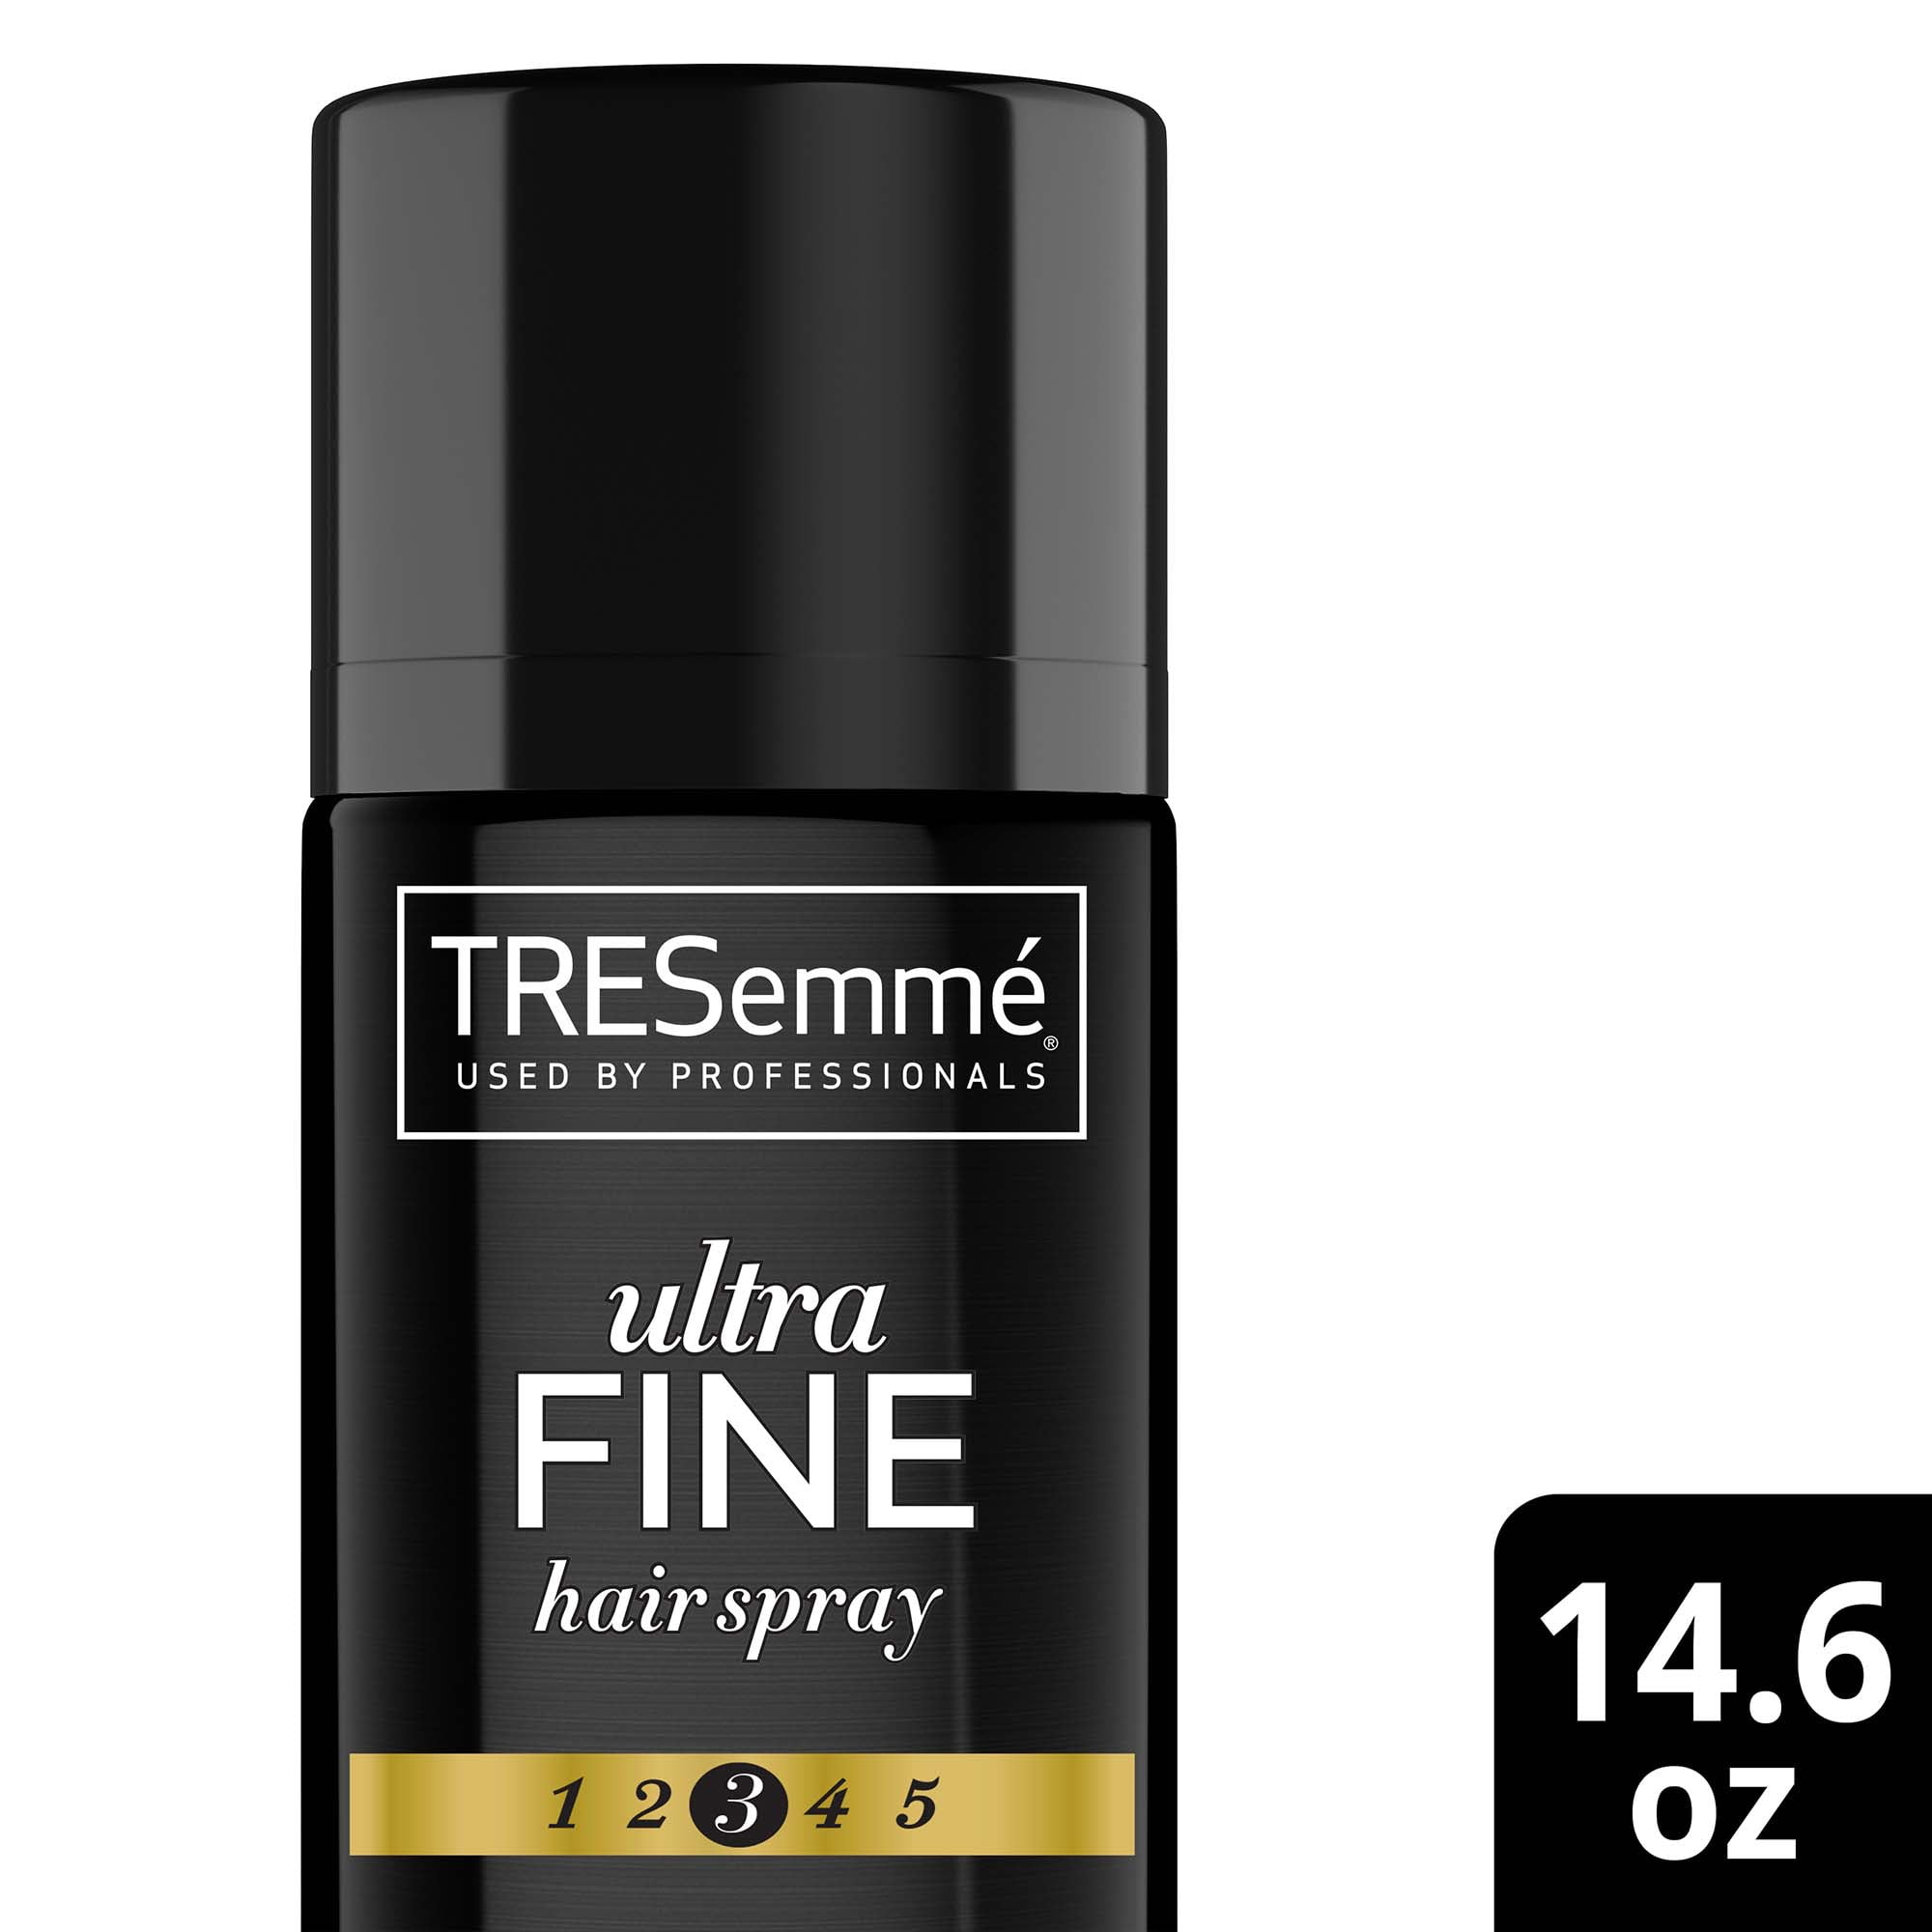 Tresemme Tres Two Humidity Resistant Ultra Fine Mist Hair Spray, 14.6 oz